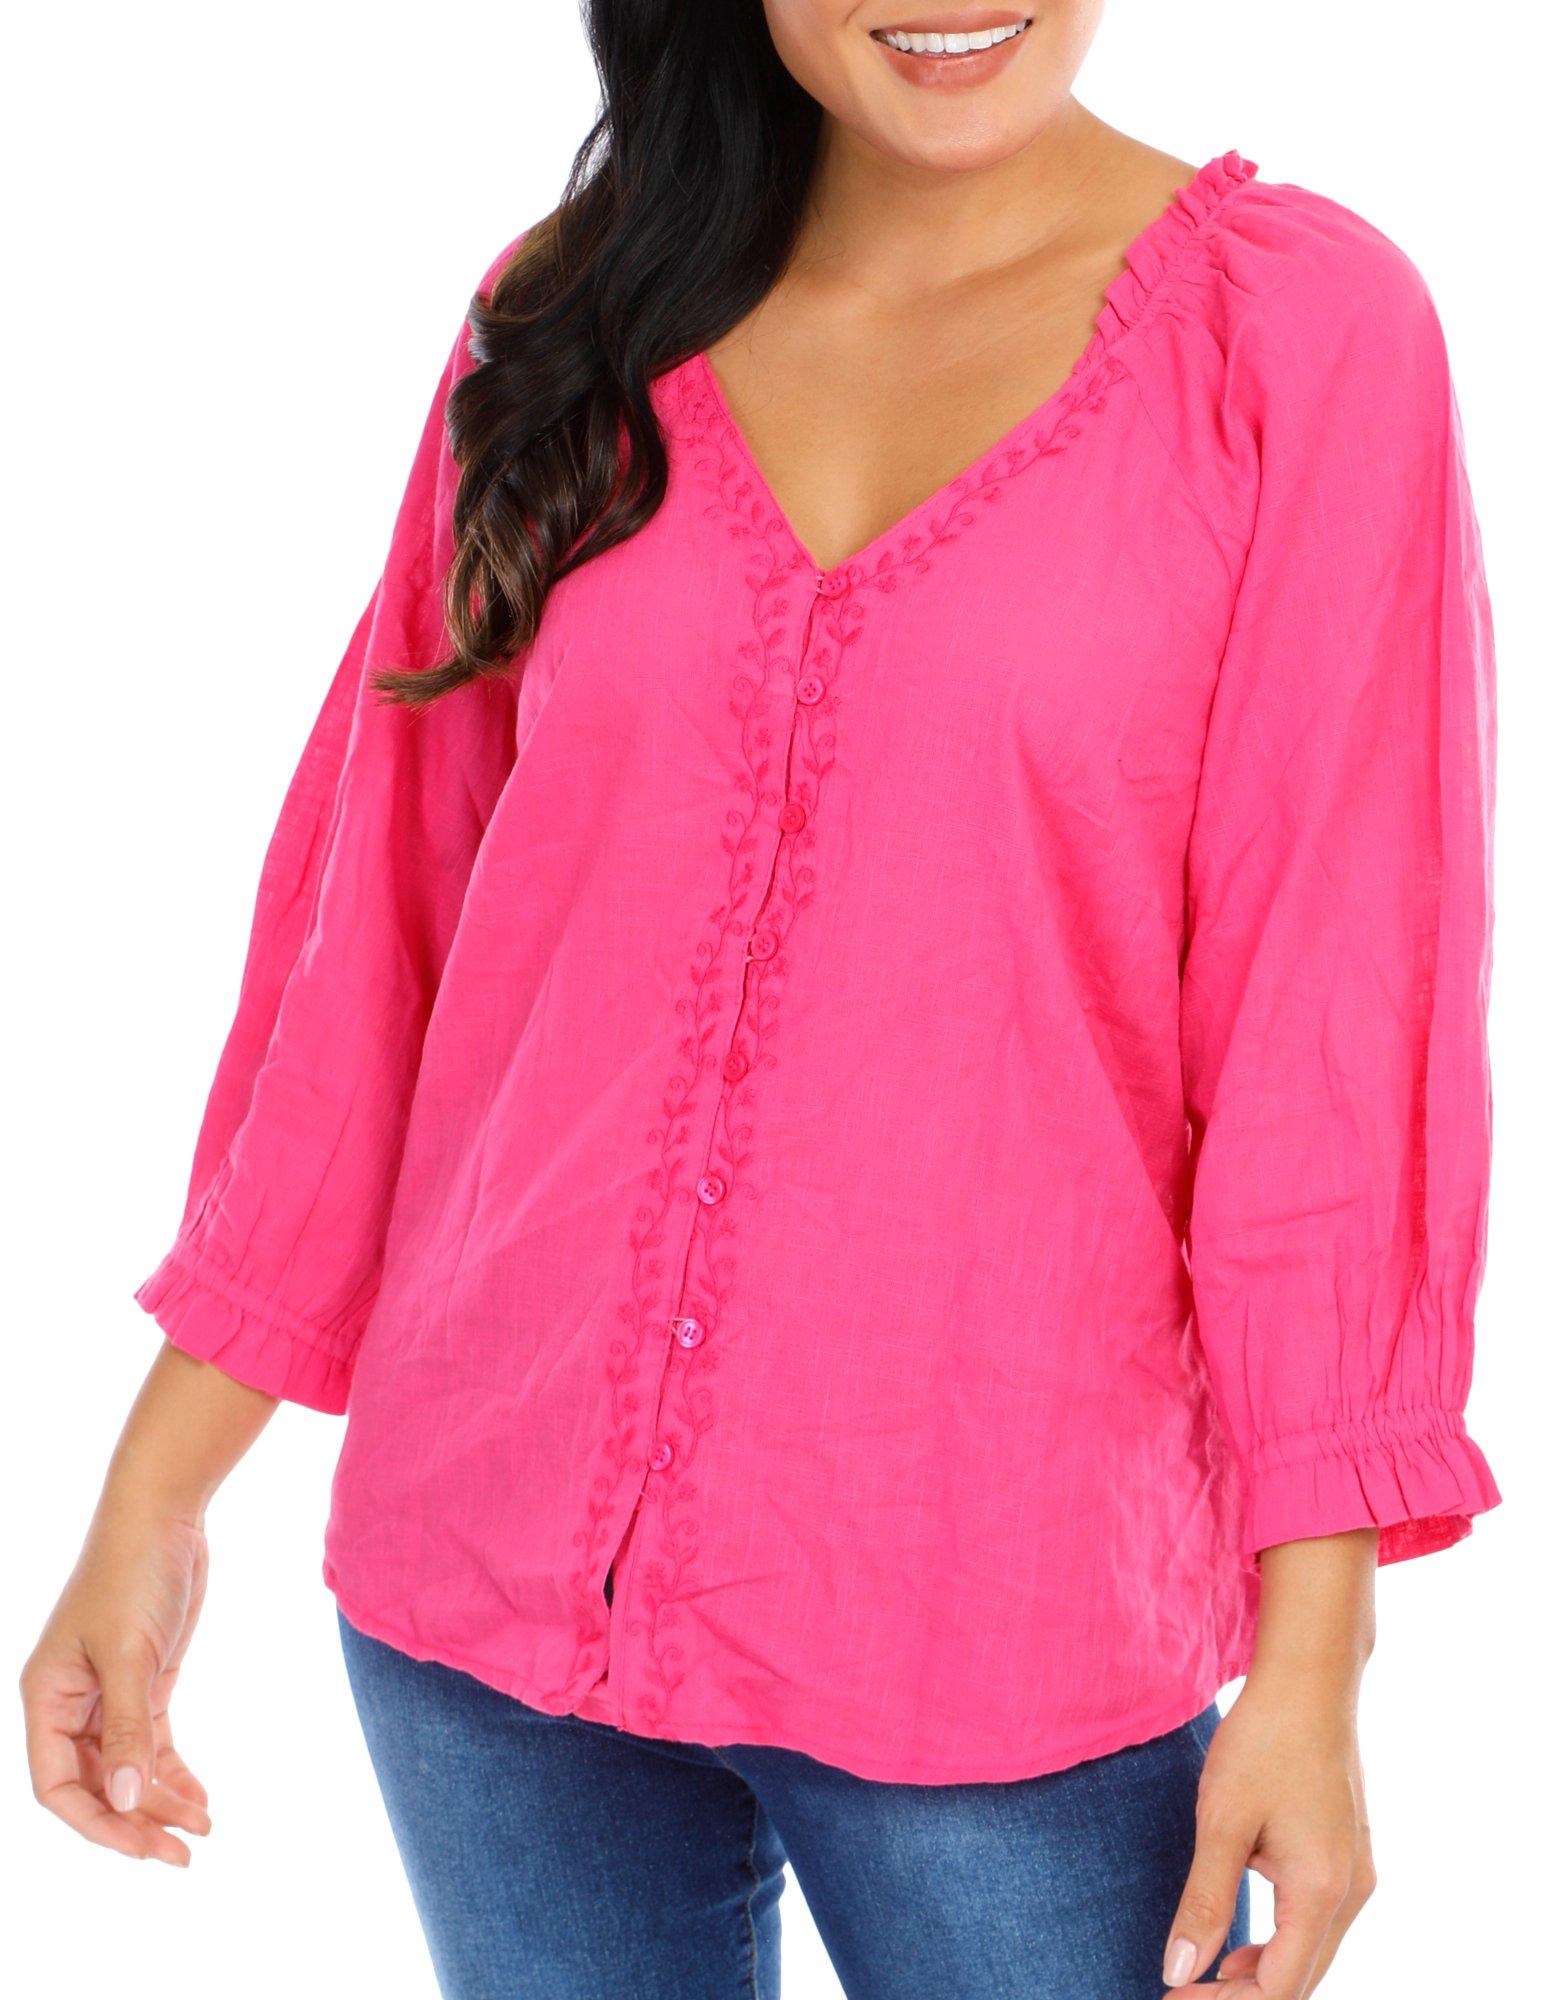 Women's Embroidered Button Down Top